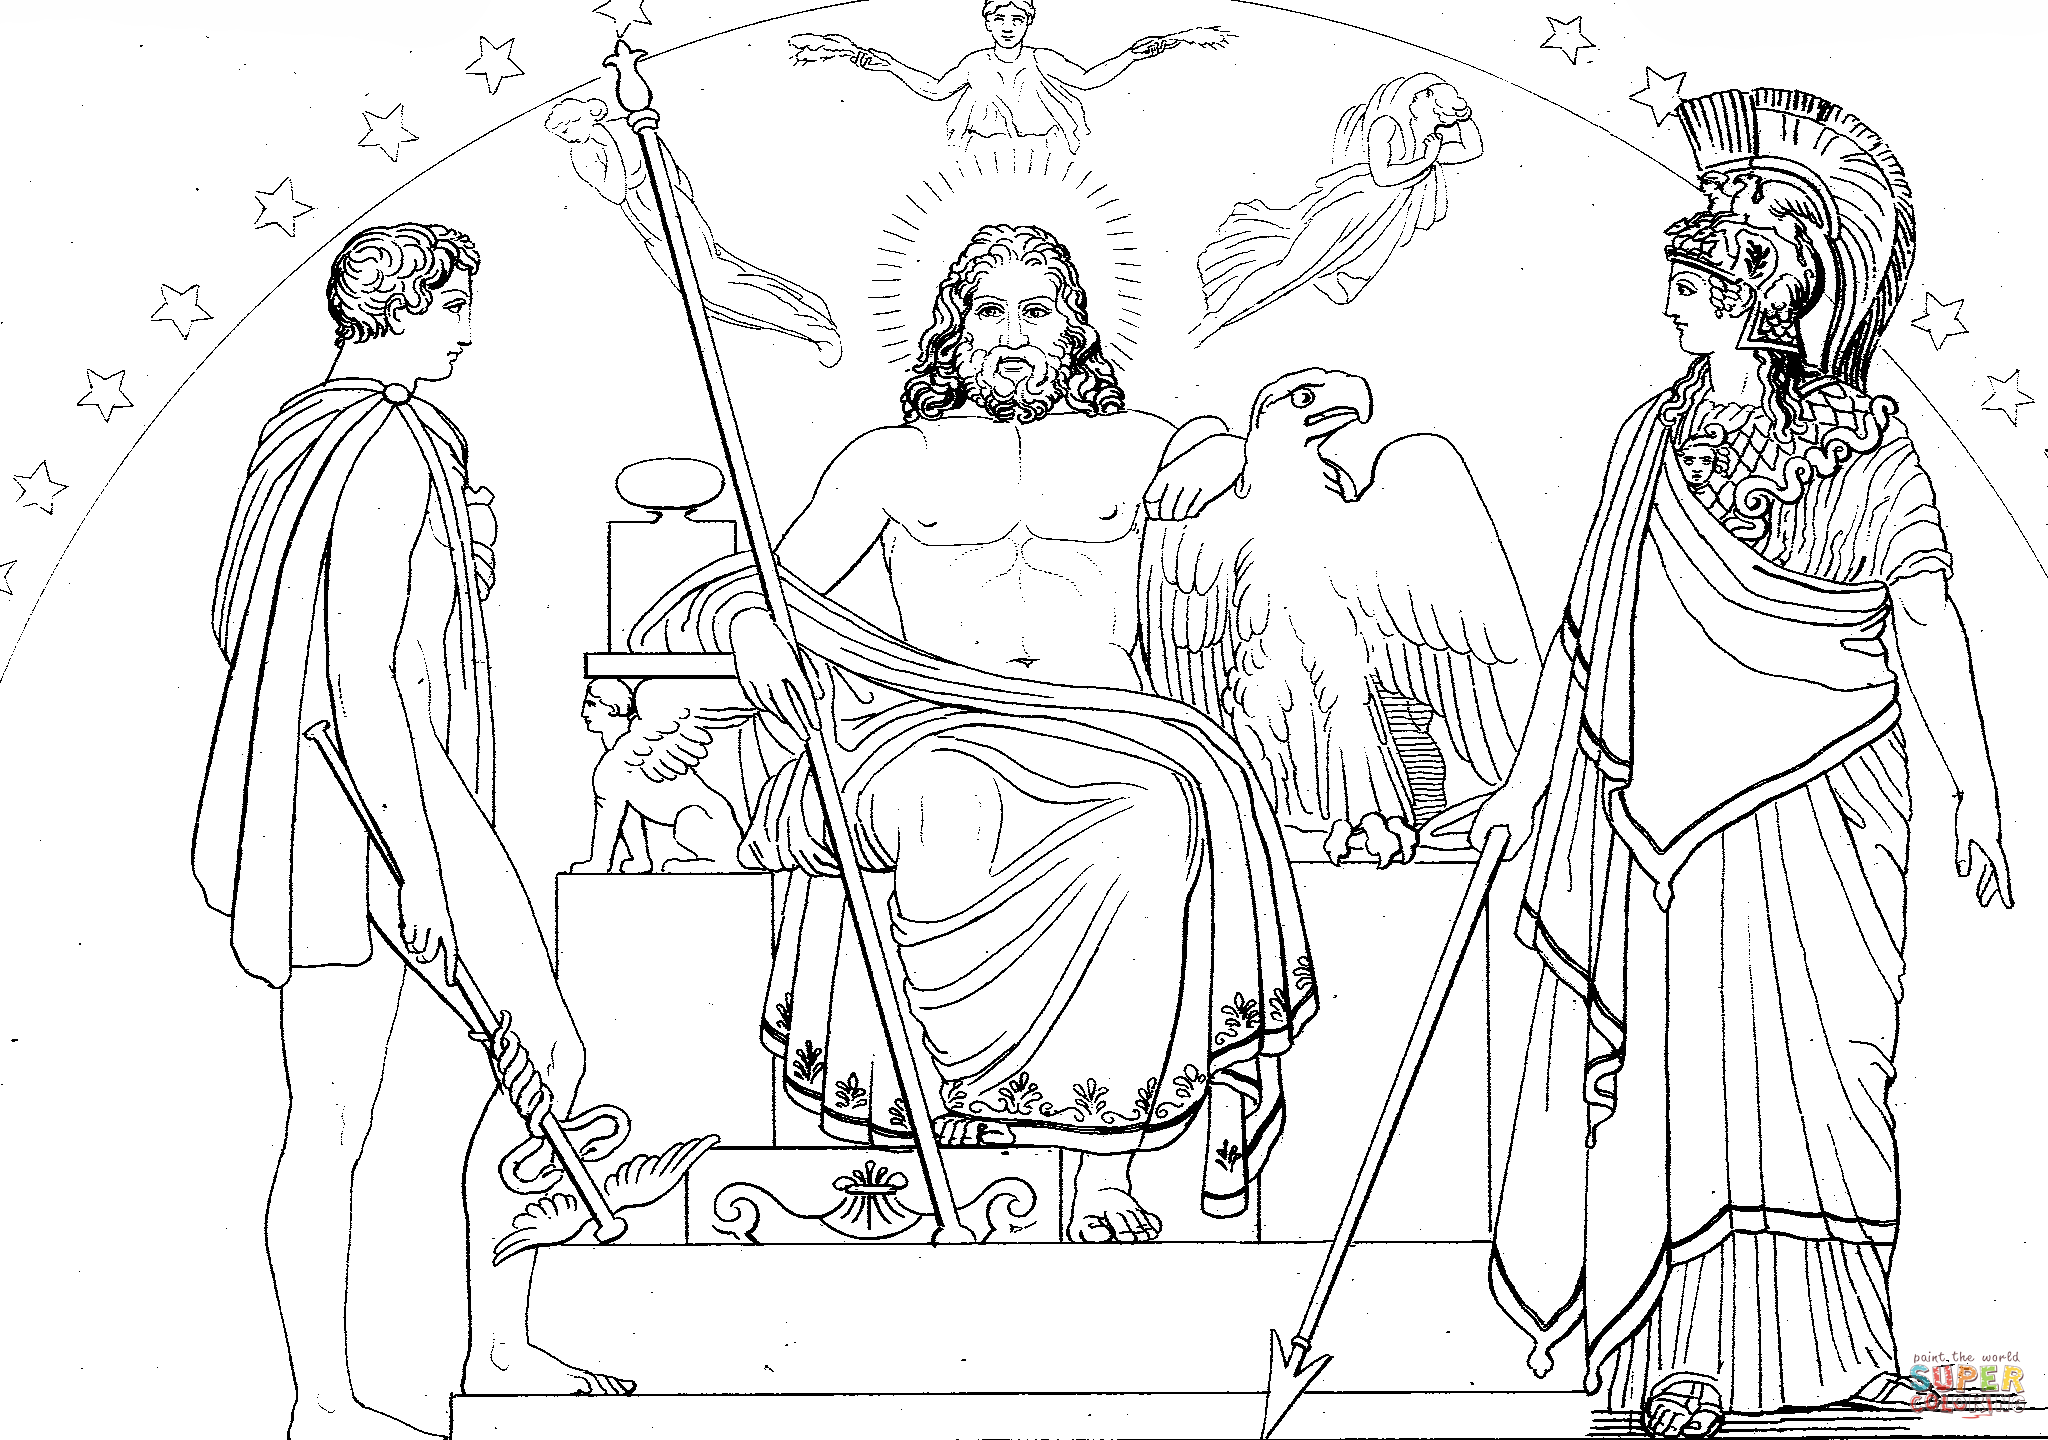 Hermes, Zeus and Athena coloring page | Free Printable Coloring Pages